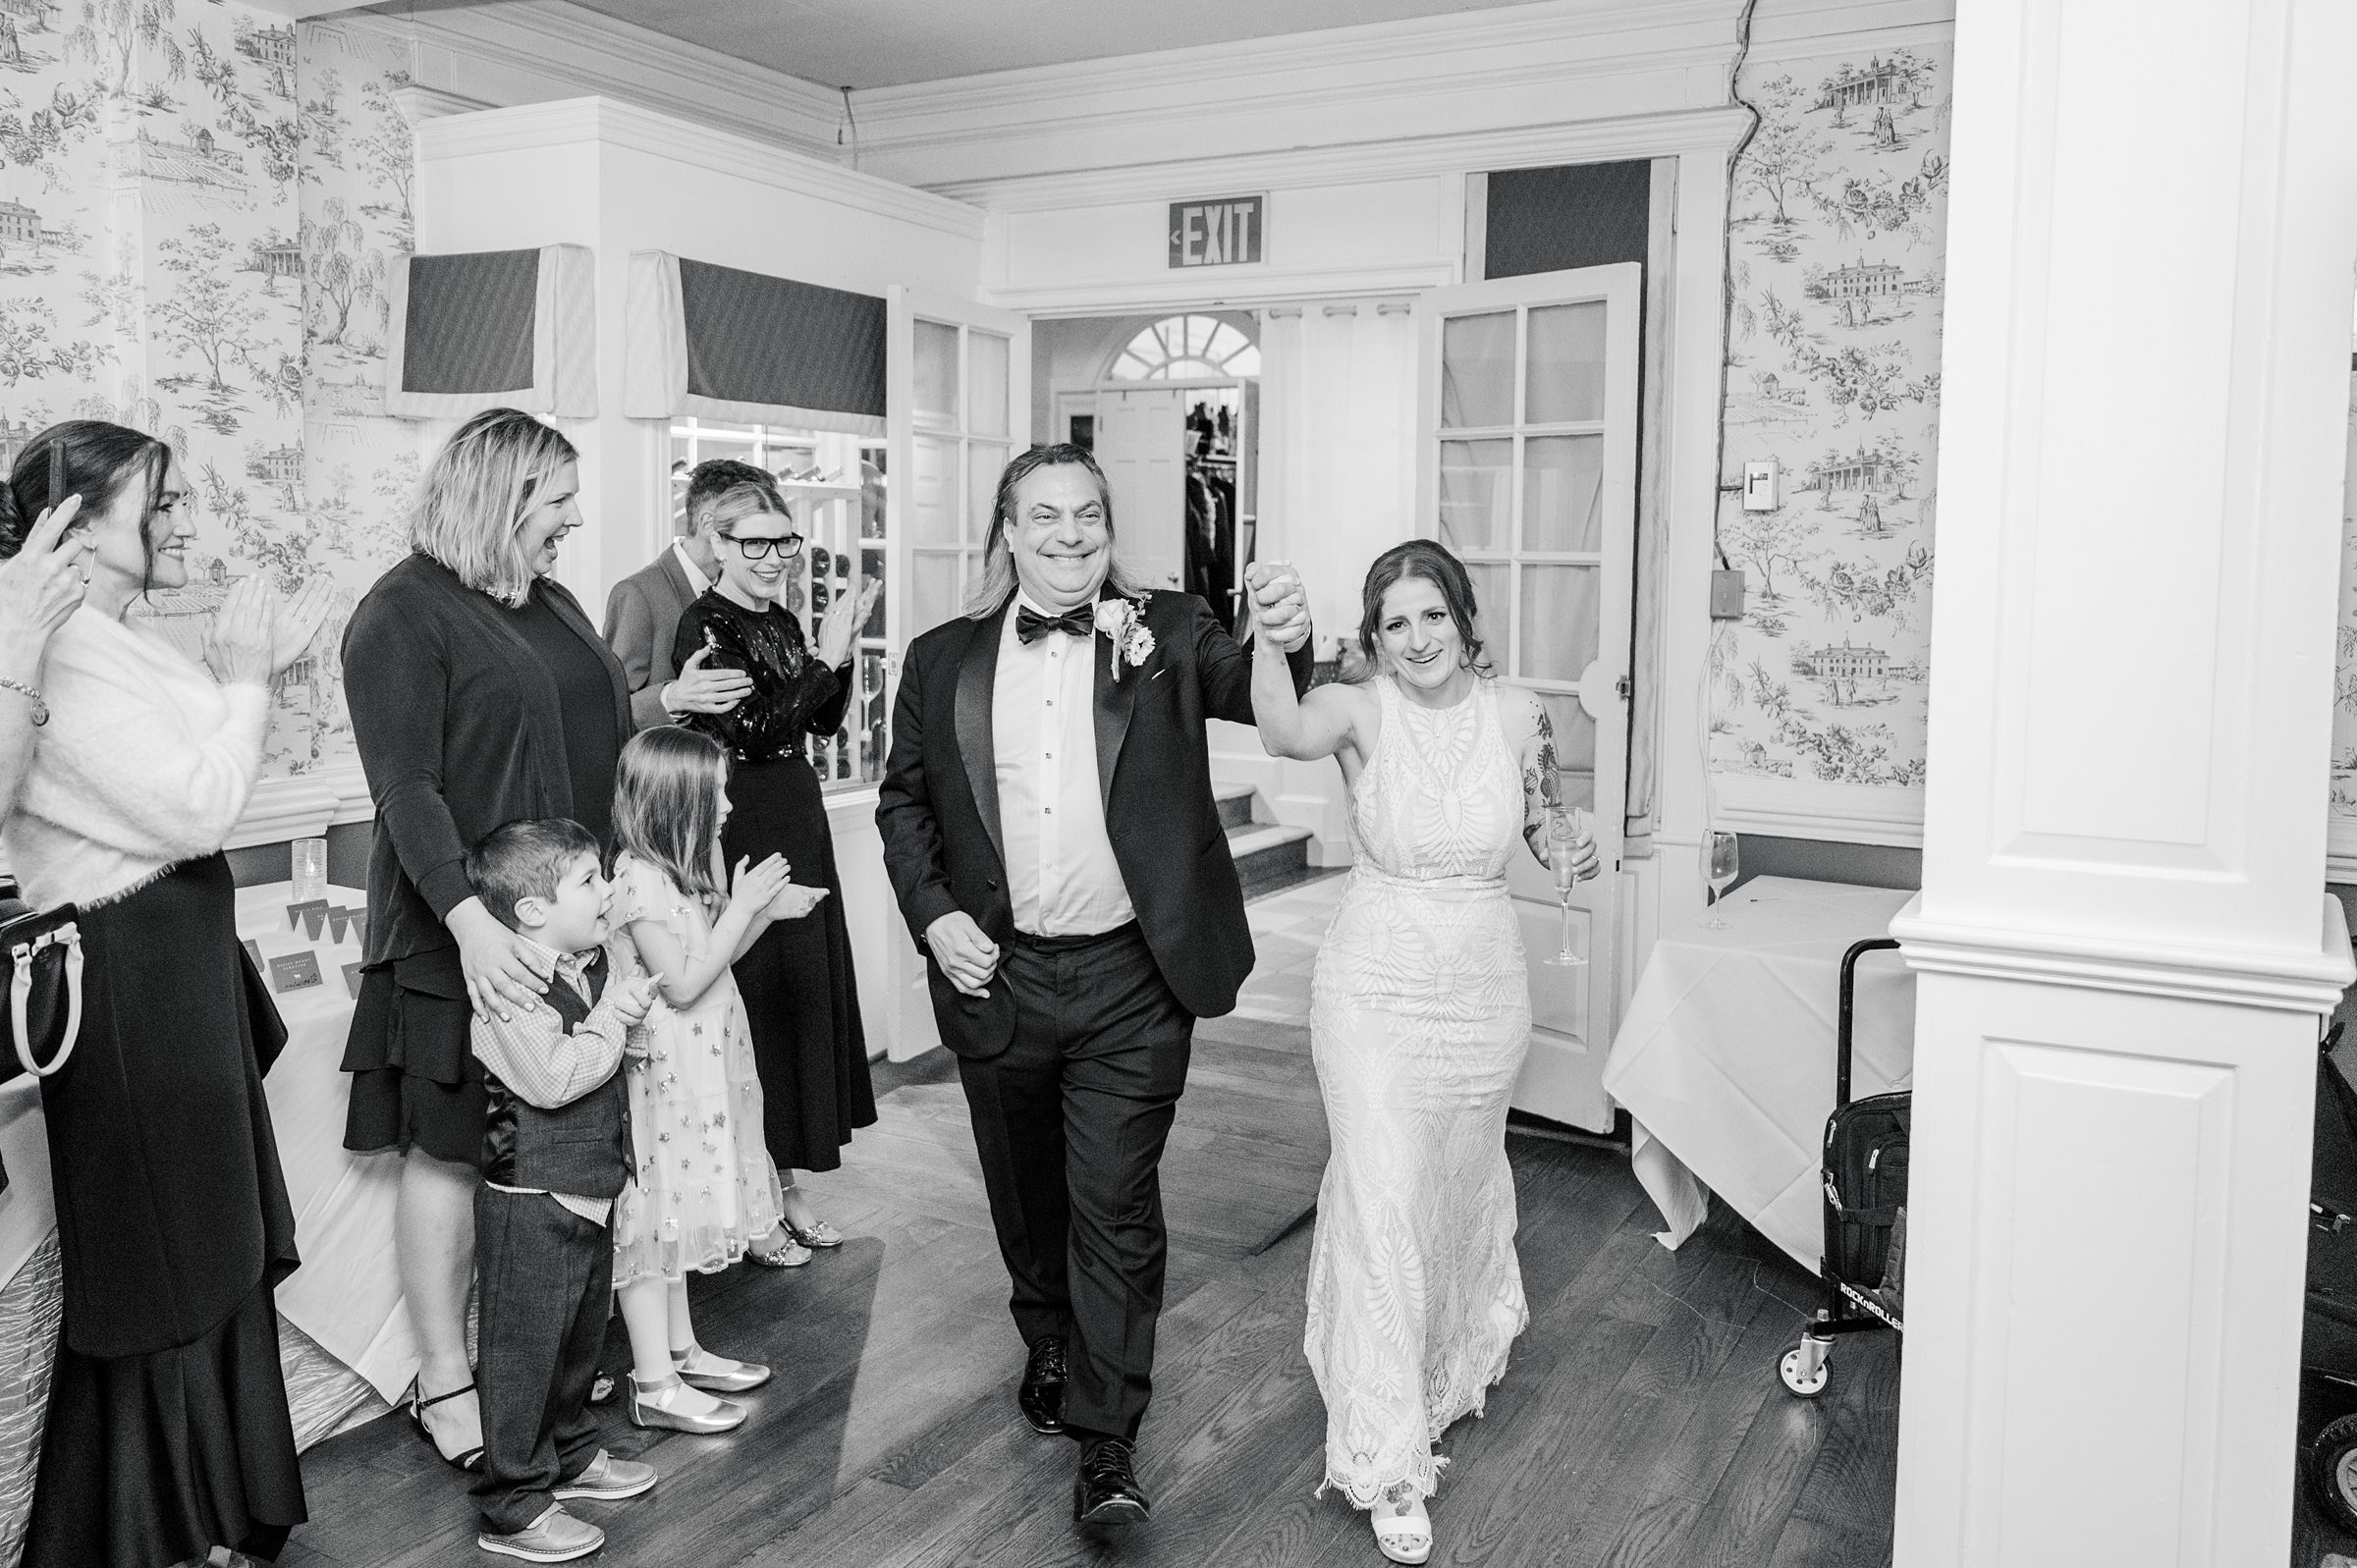 Spring Wedding at the Mount Vernon Inn Restaurant in Alexandria, Virginia photographed by Baltimore Photographer Cait Kramer Photography.